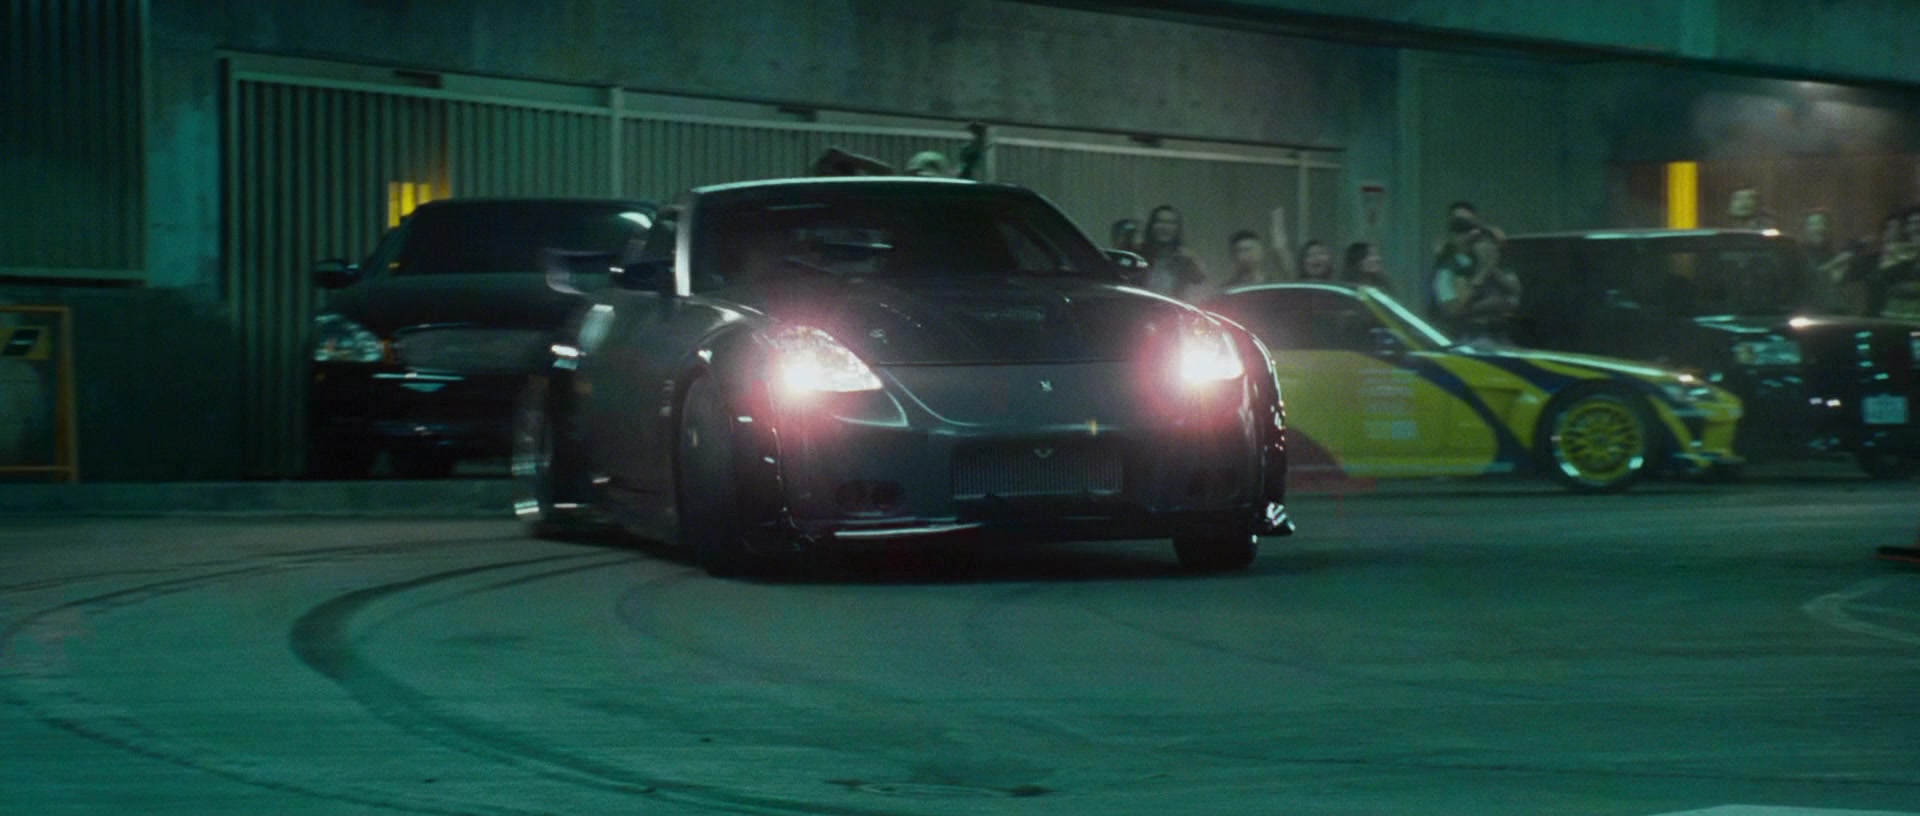  2002 Nissan Fairlady Z [Z33] in The Fast and the Furious: Tokyo  Drift, 2006